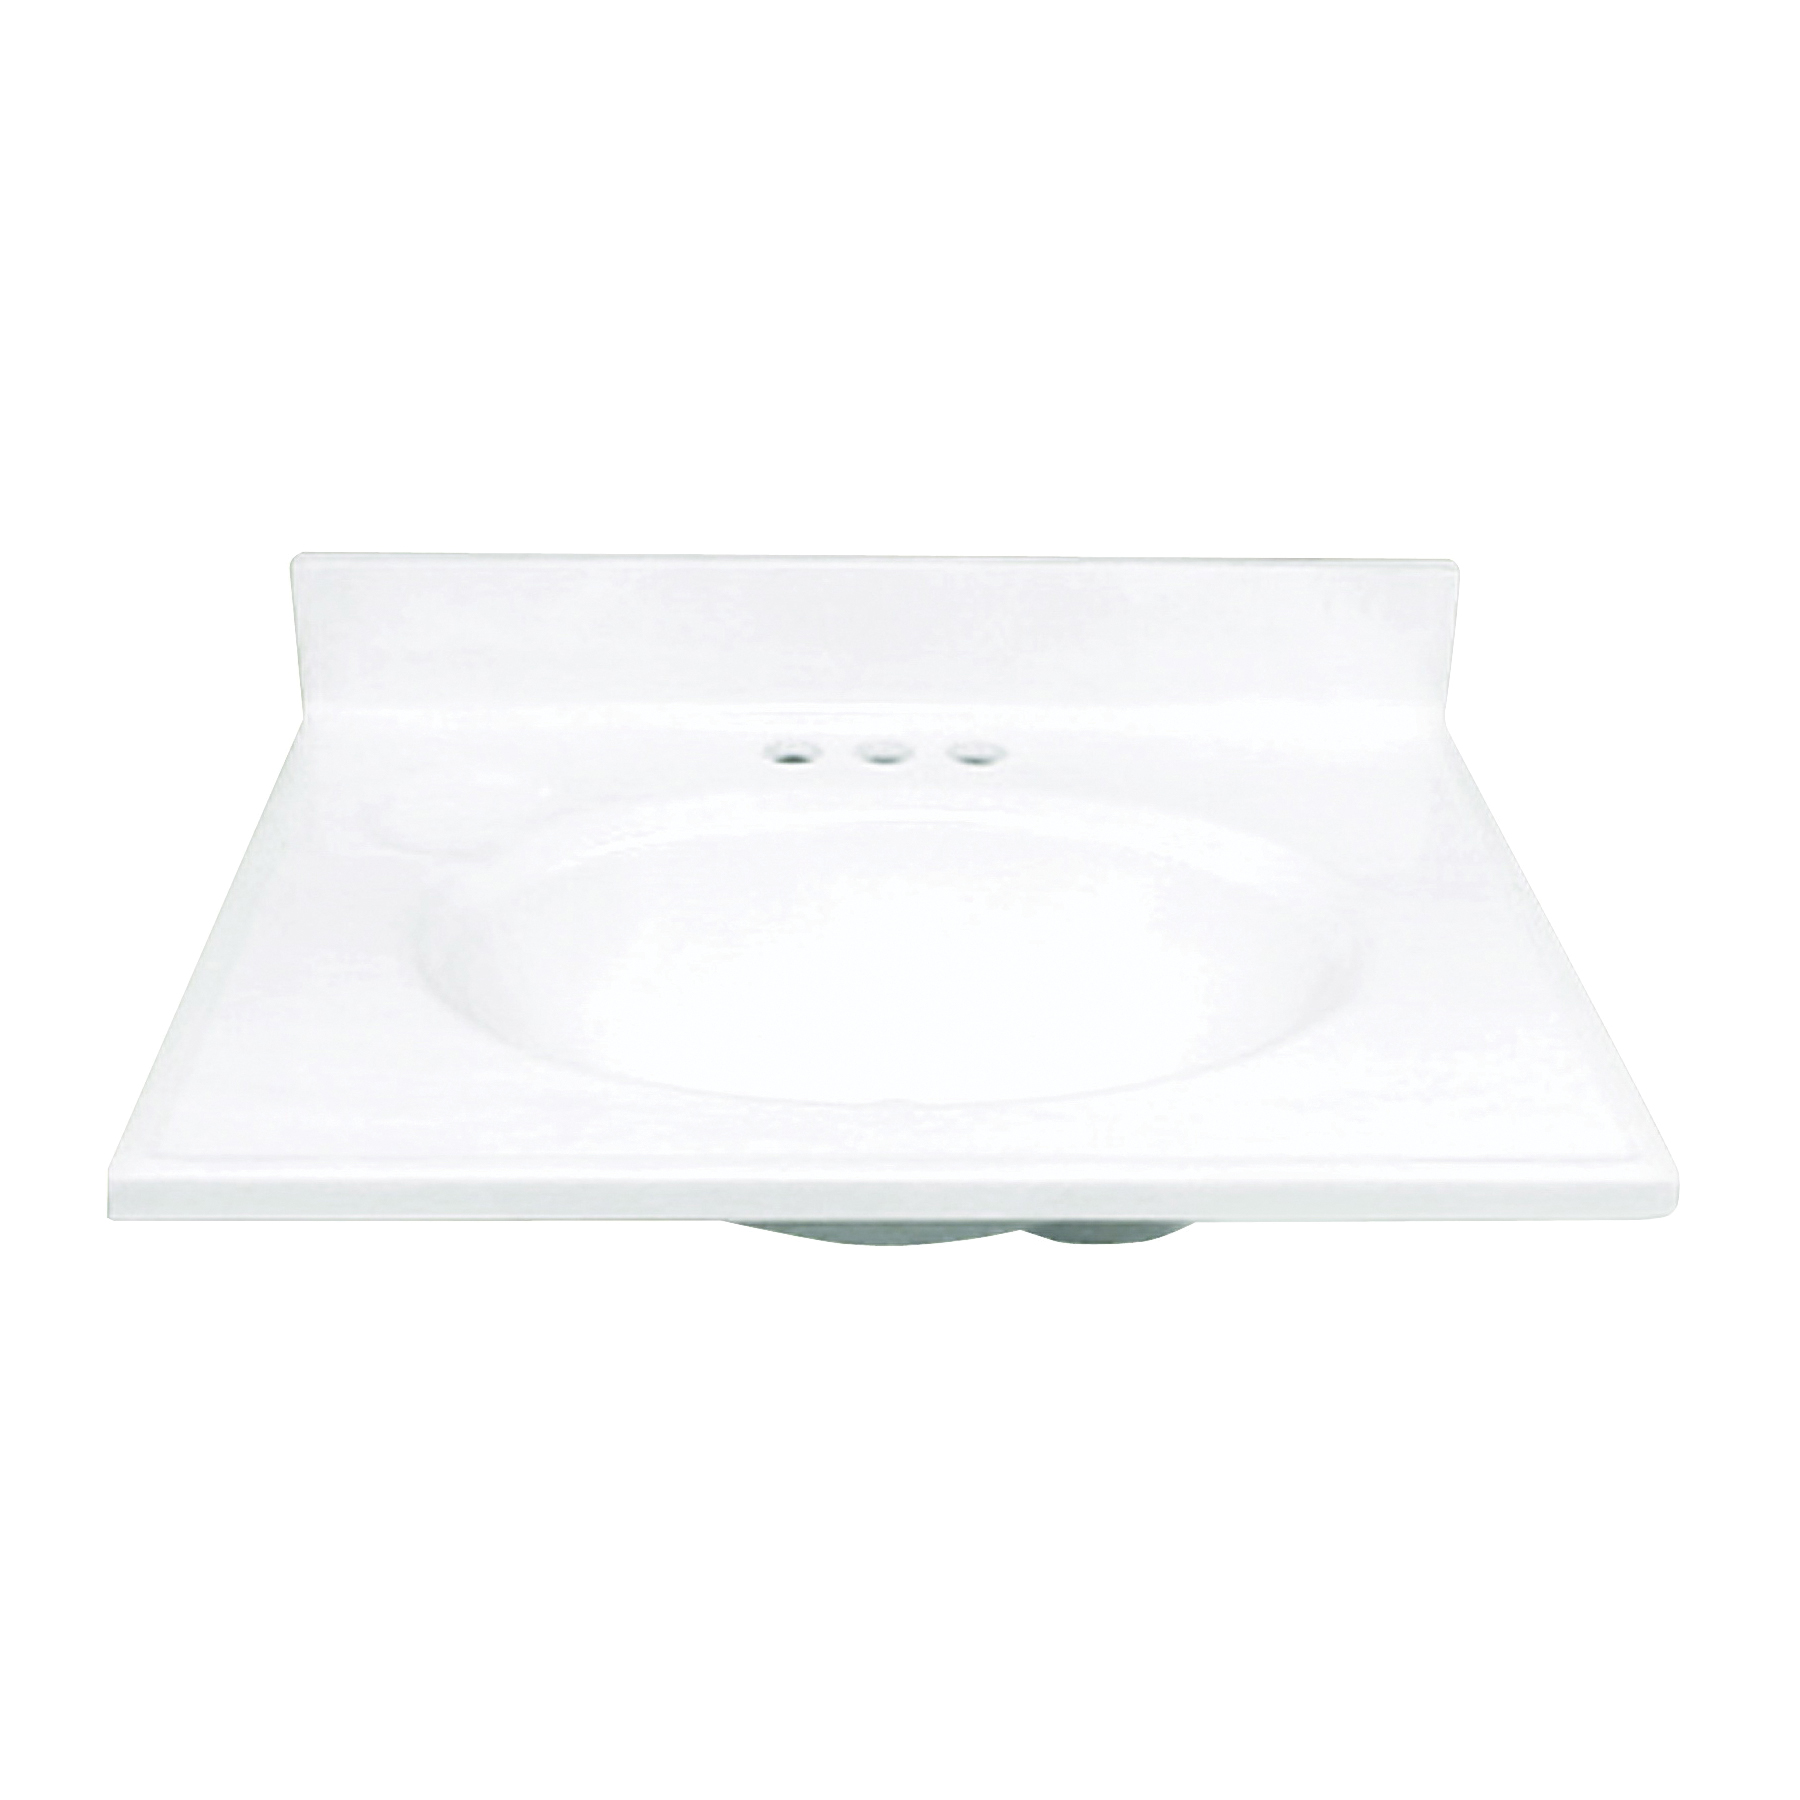 WS-1925 Vanity Top, 25 in OAL, 19 in OAW, Marble, Solid White, Countertop Edge